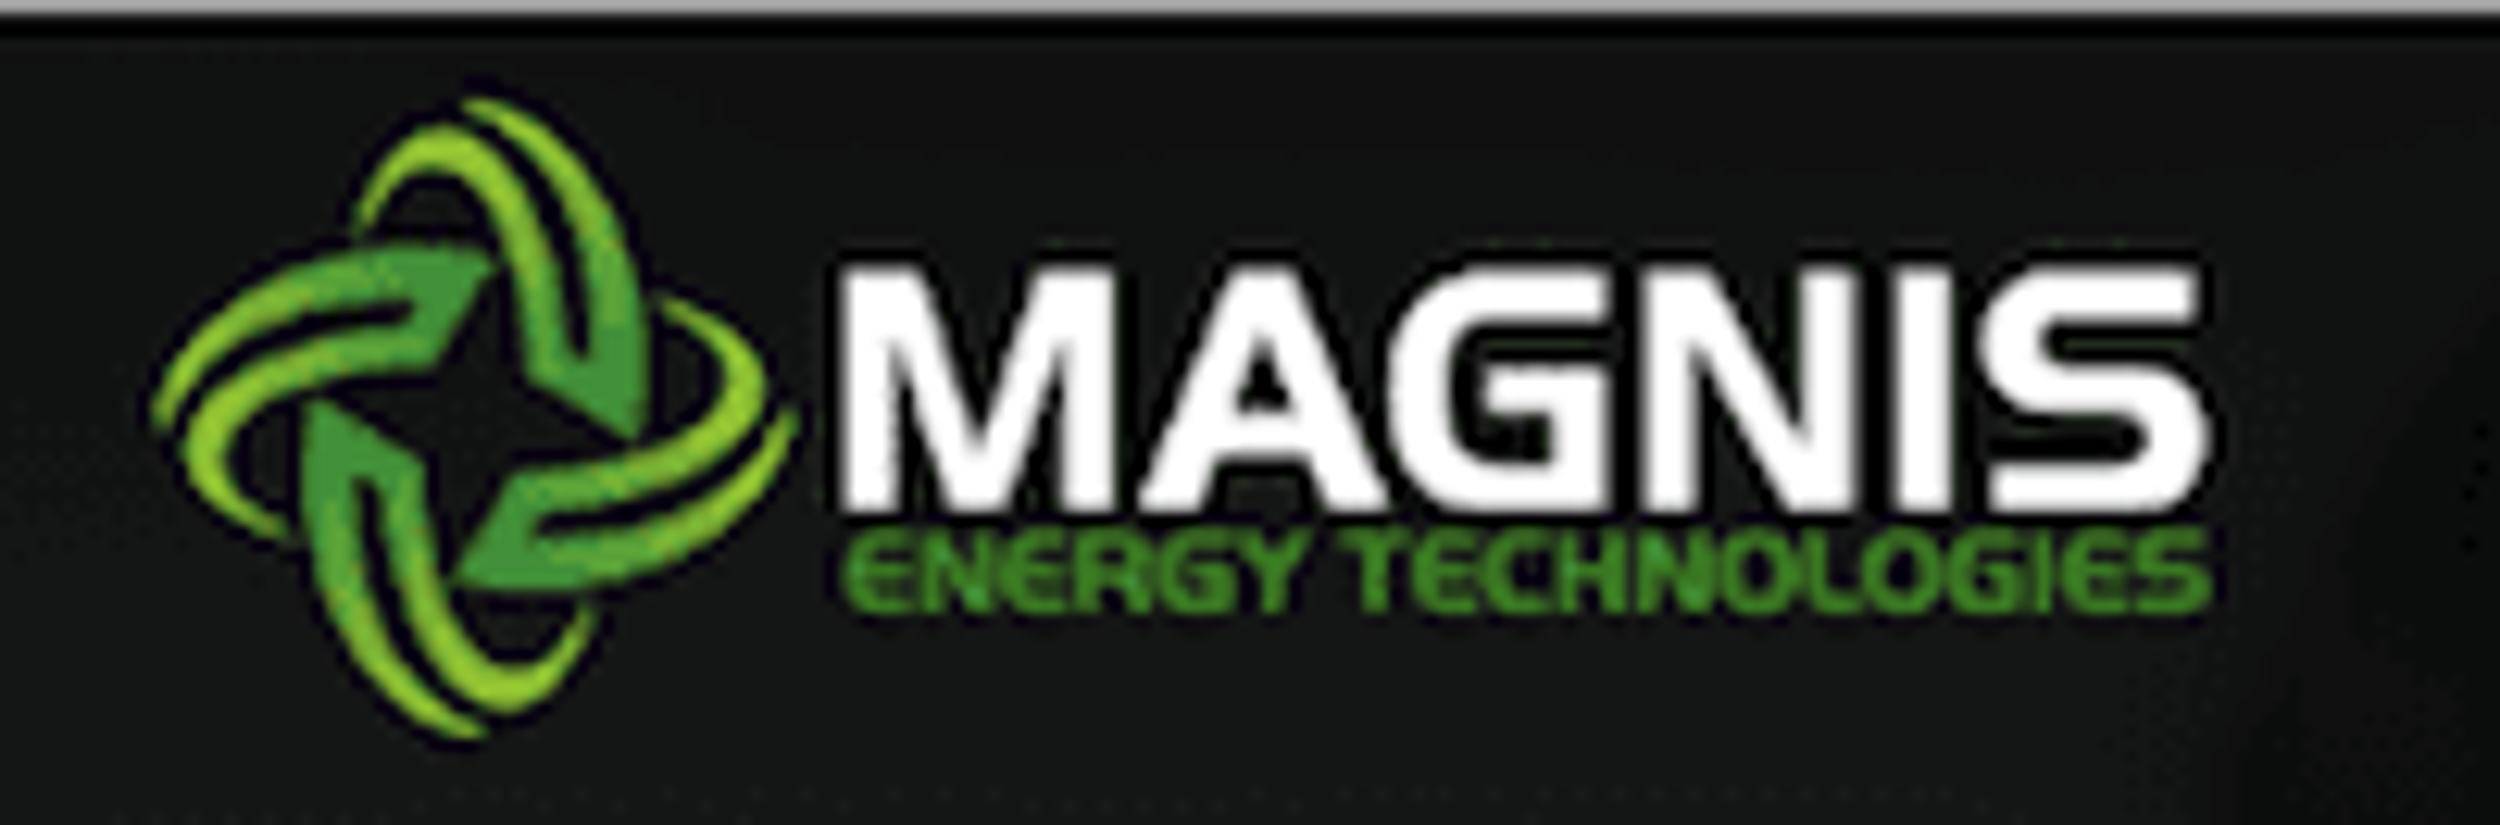 Change of Name to Magnis Energy Technologies Ltd